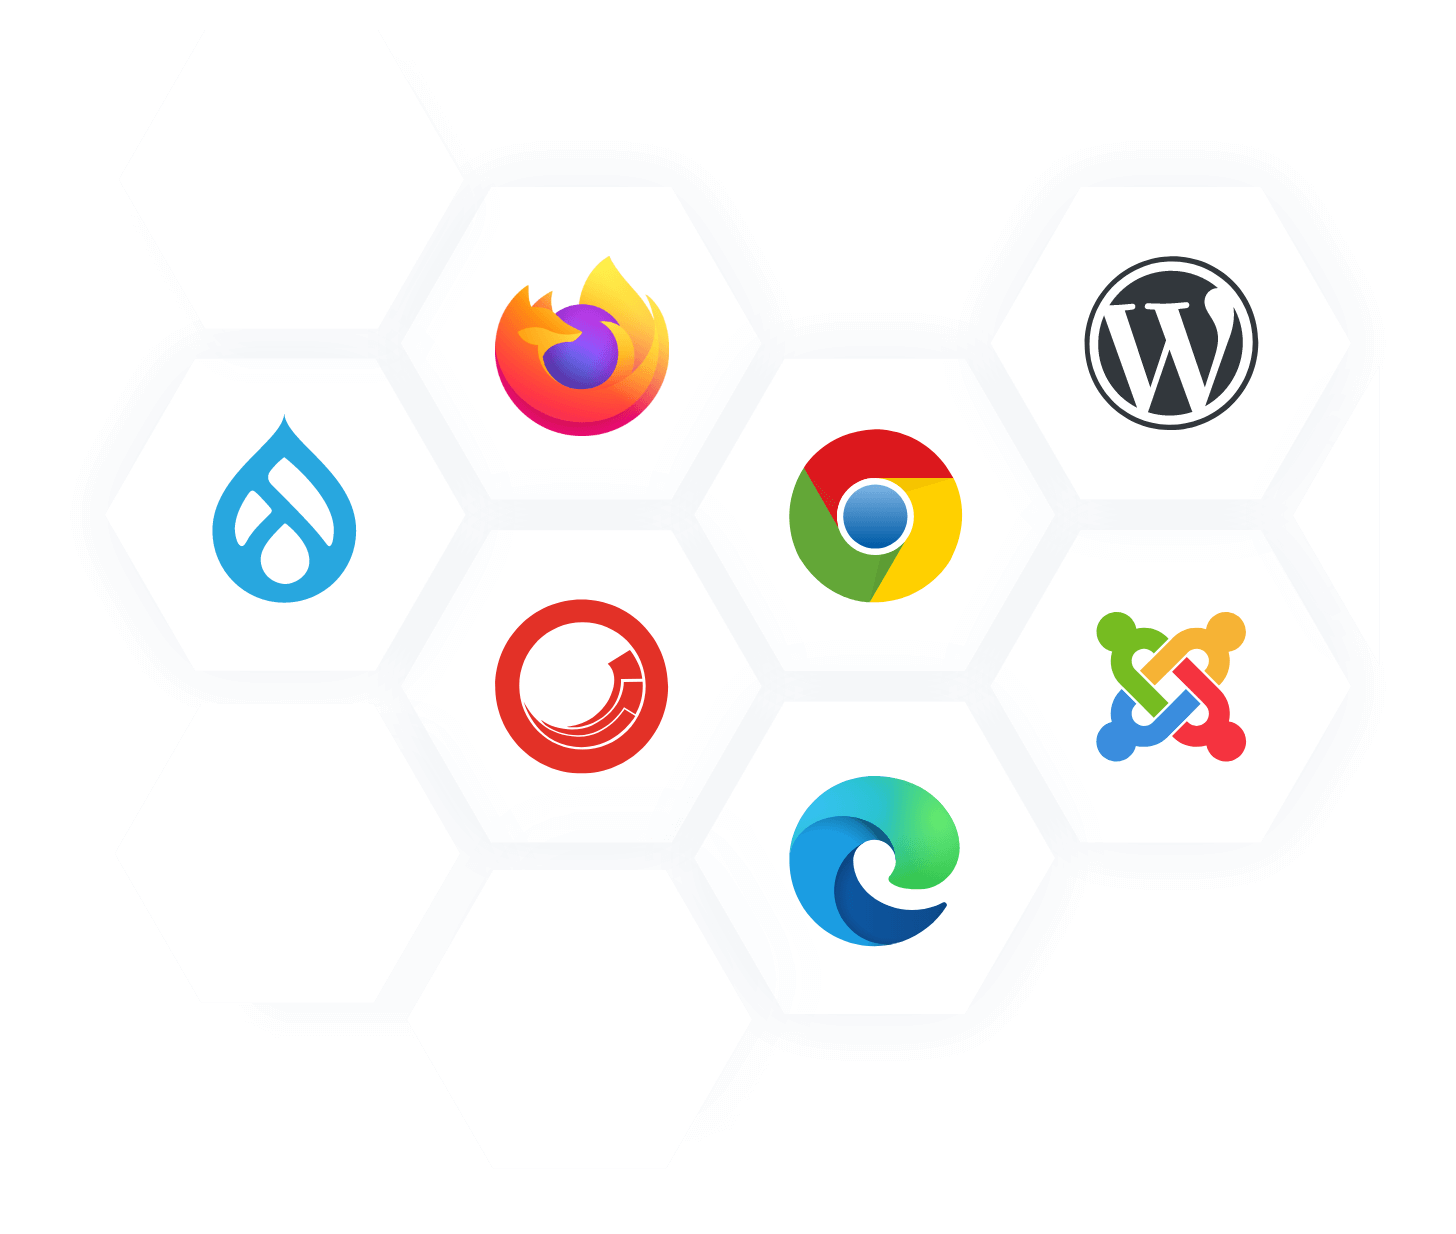 Logos of major CMSs, applications and browsers that work with Monsido